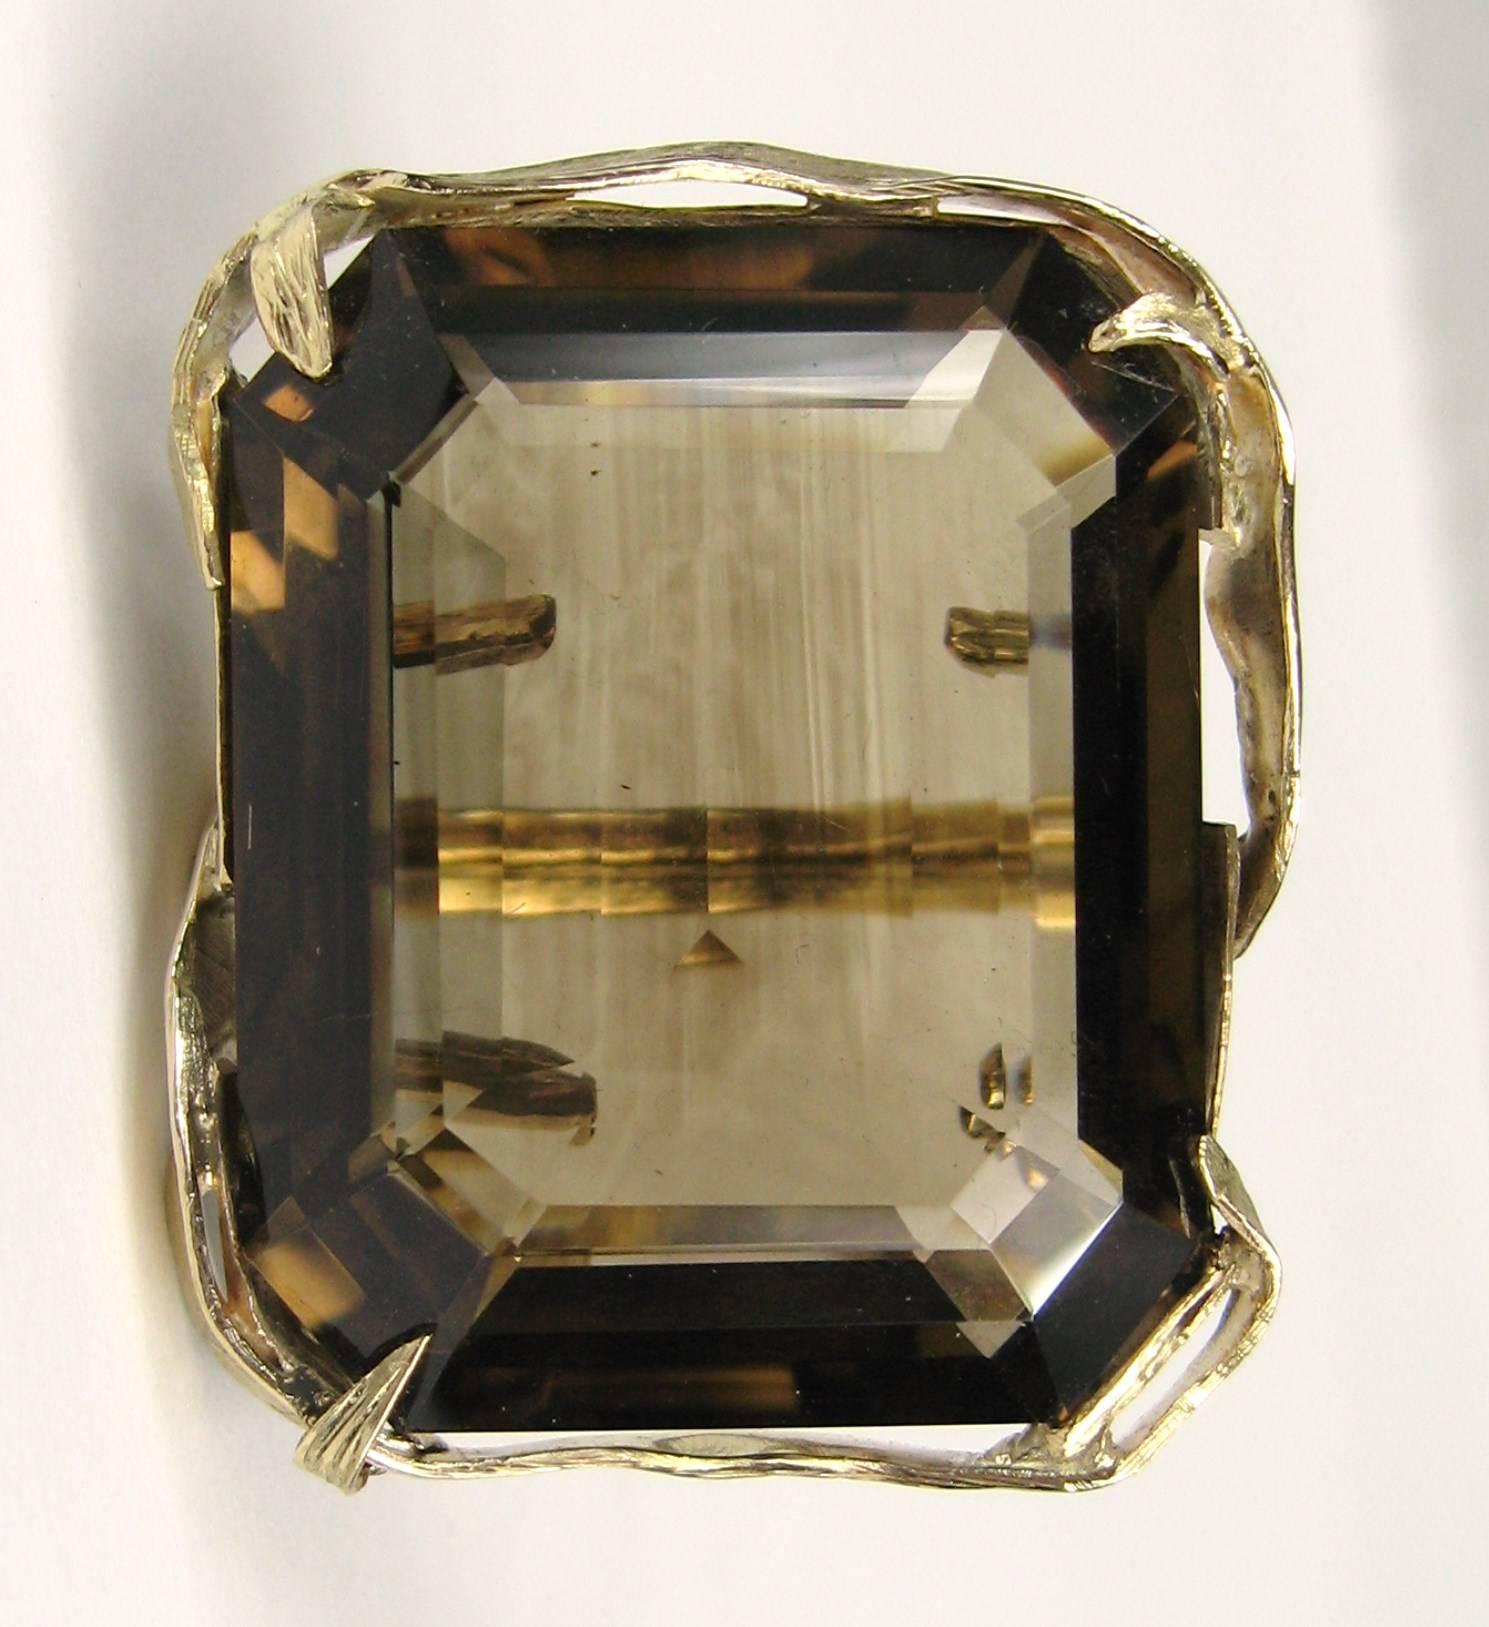 This is a one of kind Custom Made 95 Carat Smokey Topaz 14K Gold Cocktail Ring. Measuring 1.53 inches x 1.30 inches wide on the stone set in a 14K. The stone is approximately 95.25 carats.  The ring is a size 6.5 and can be sized by us or your